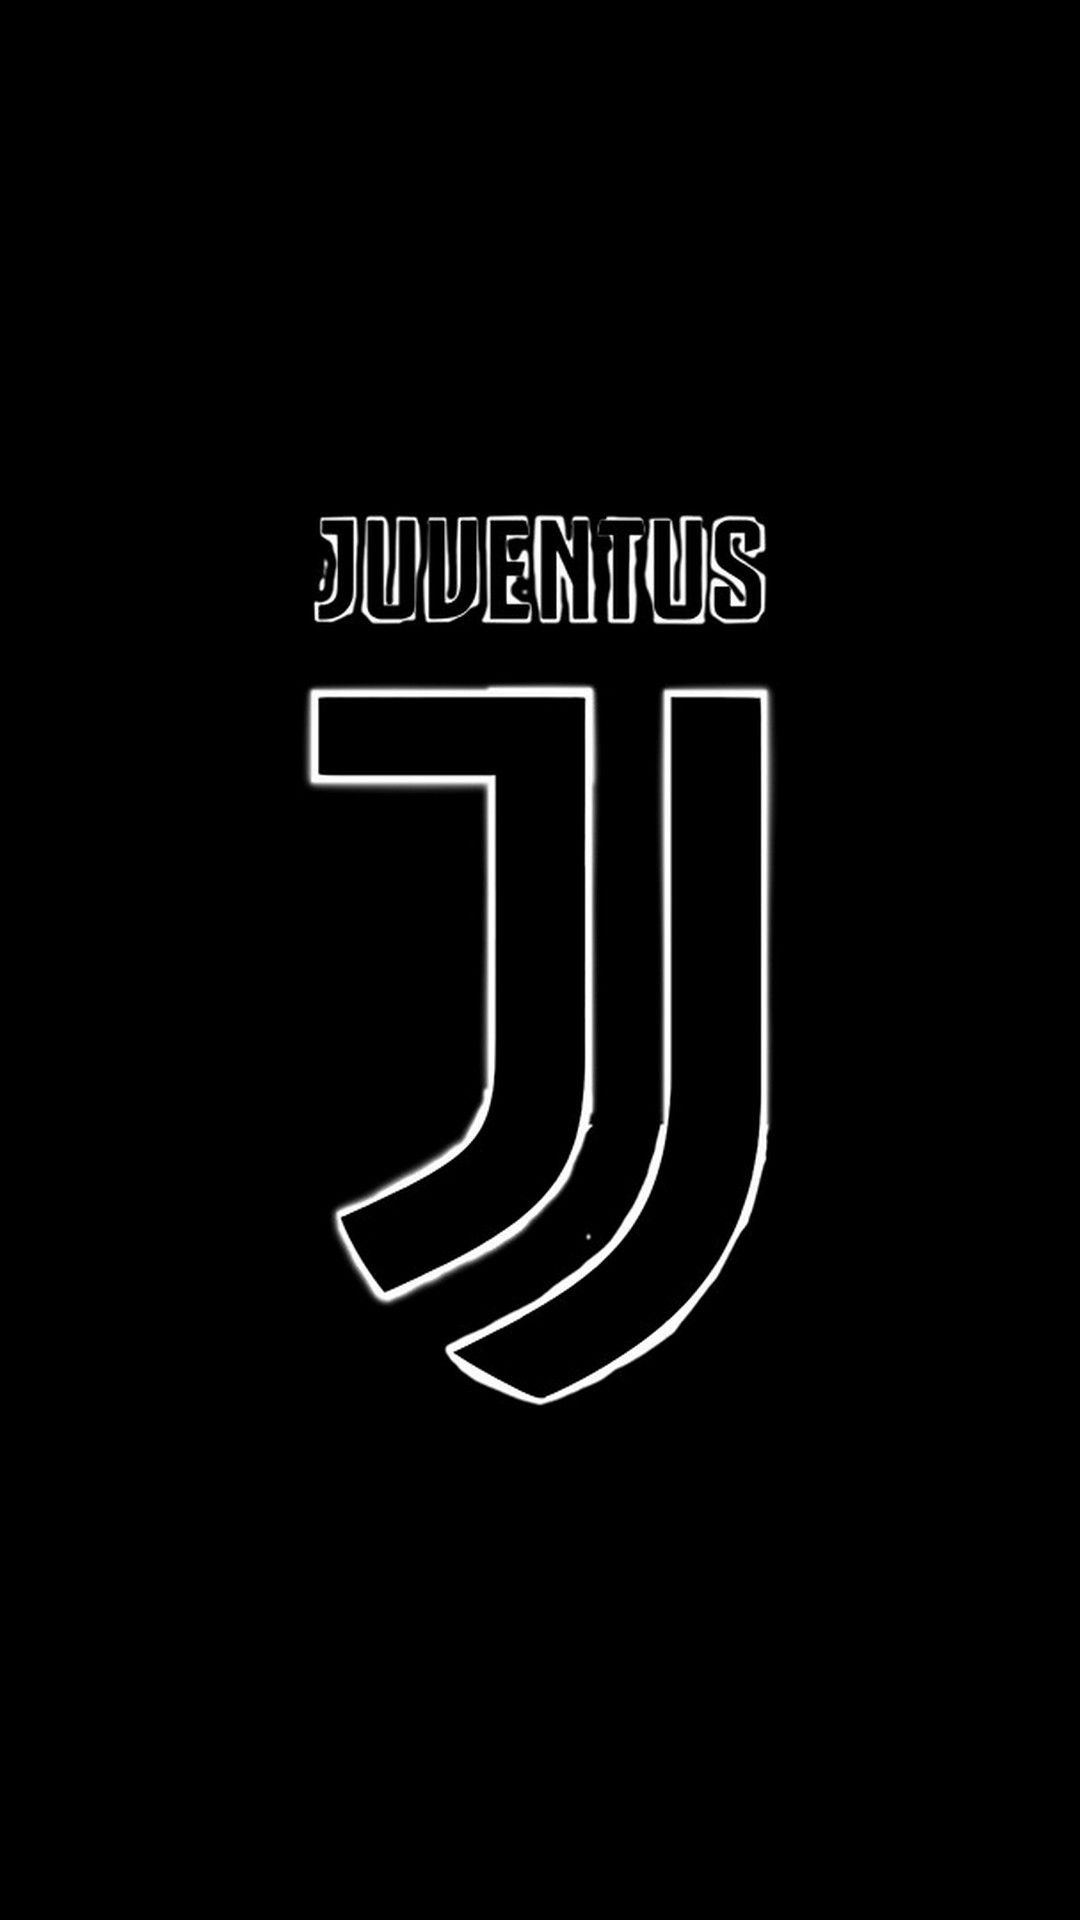 Juventus: The biggest fan base, A total of 170 million Juve's supporters. 1080x1920 Full HD Background.